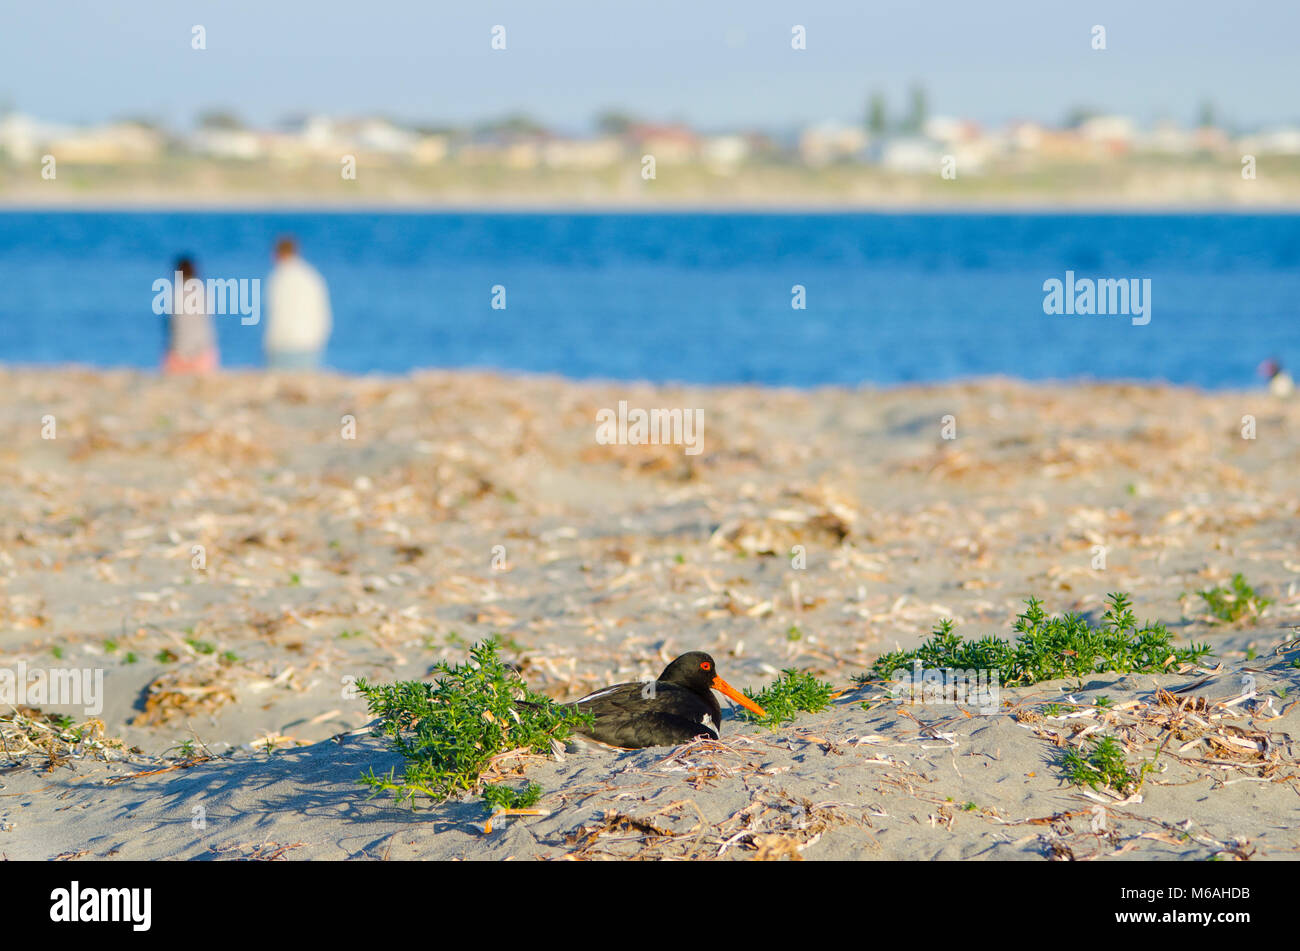 Pied oystercatcher (Haematopus longirostris) sitting on nest in dunes as people walk by. Stock Photo